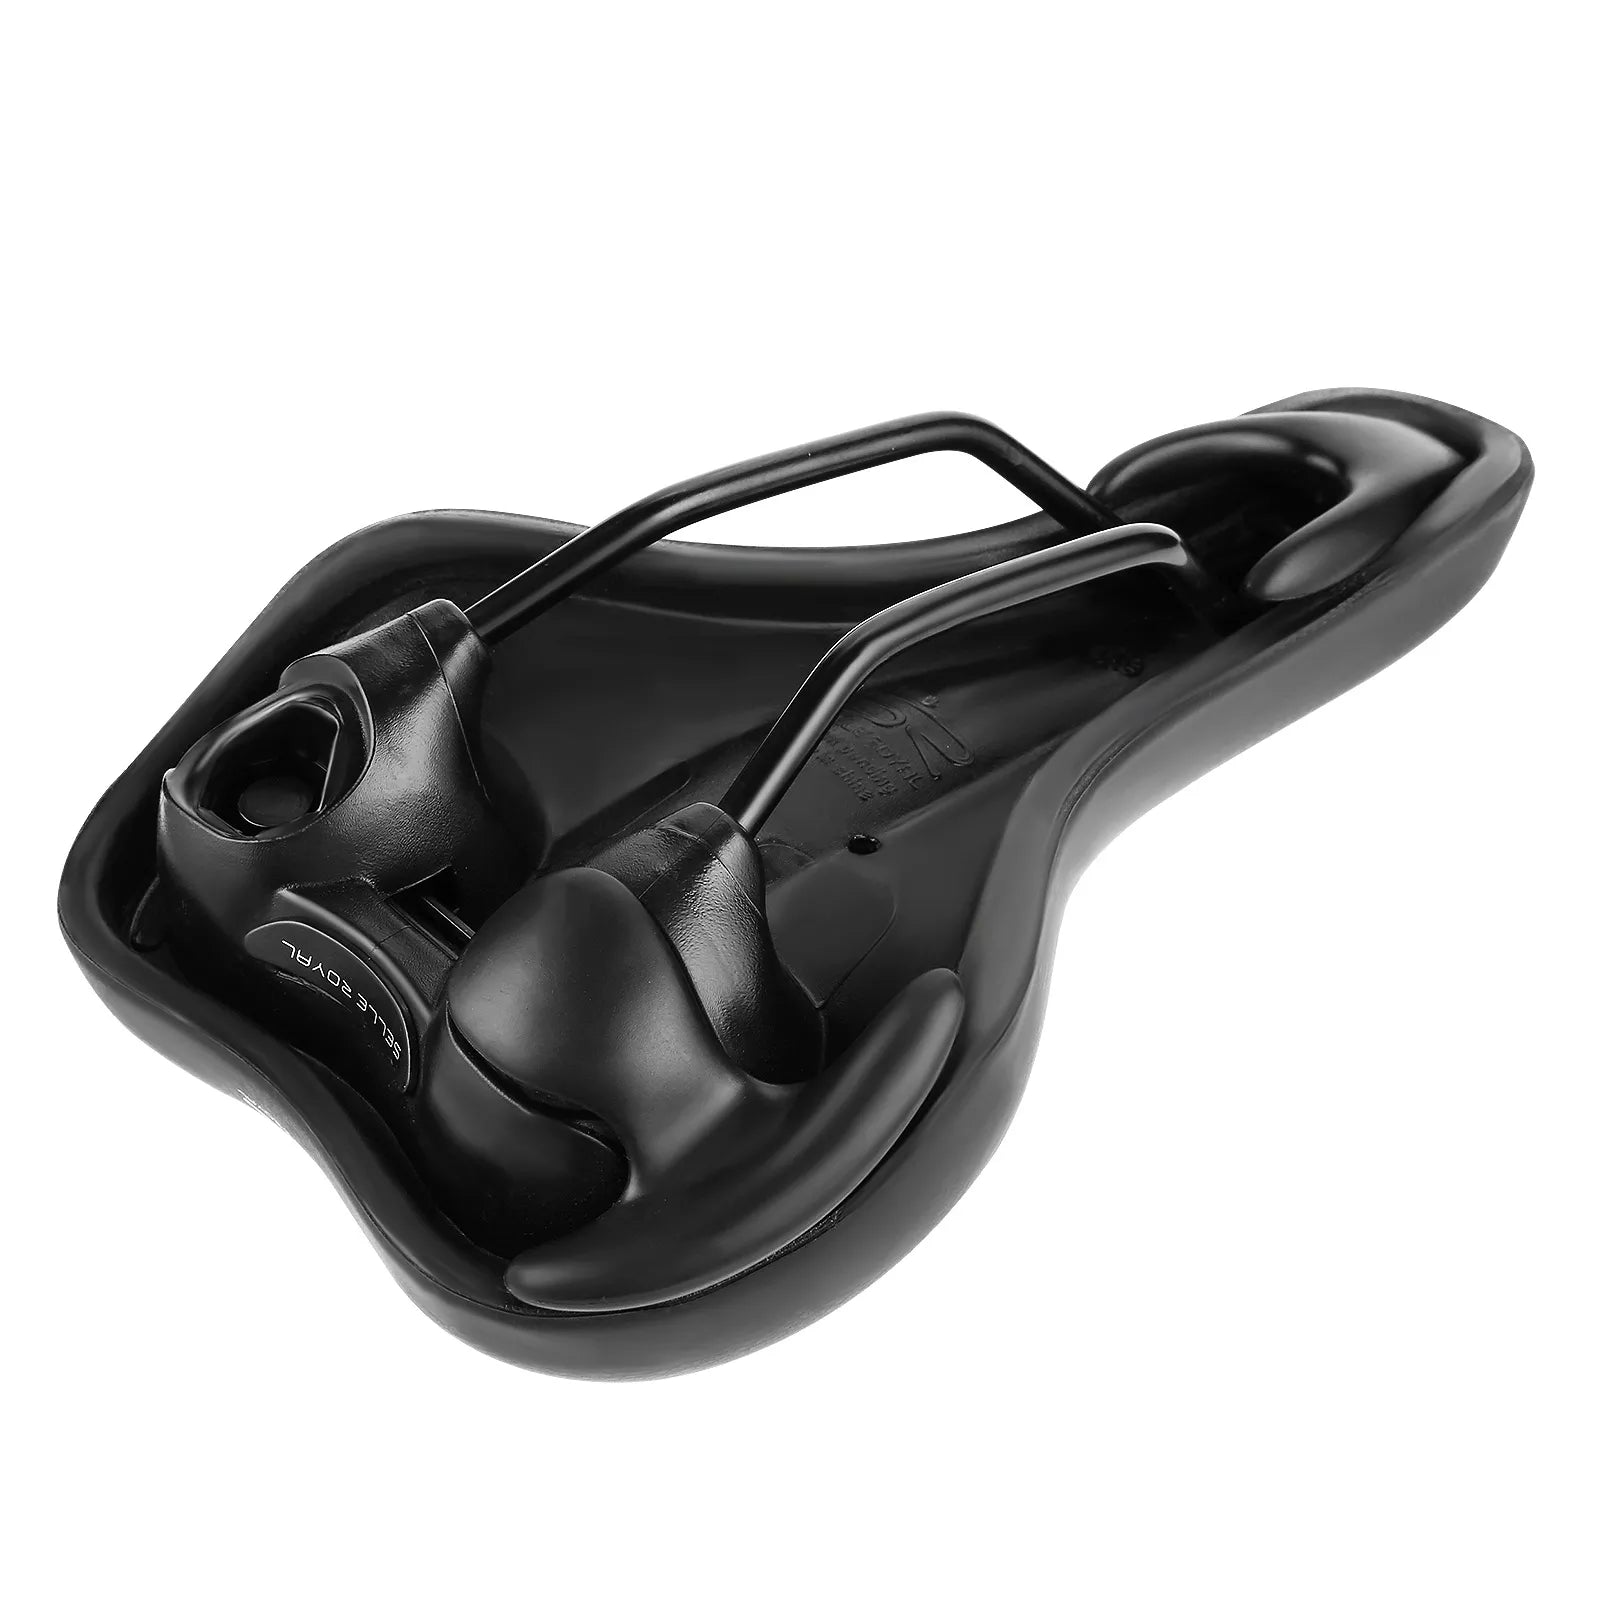 Vanpowers Manidae ebike Comfort Saddle - Featuring high-quality polyurethane and SELLE ROYAL design, this saddle provides superior comfort by adapting to your body and ensuring a more uniform weight distribution.